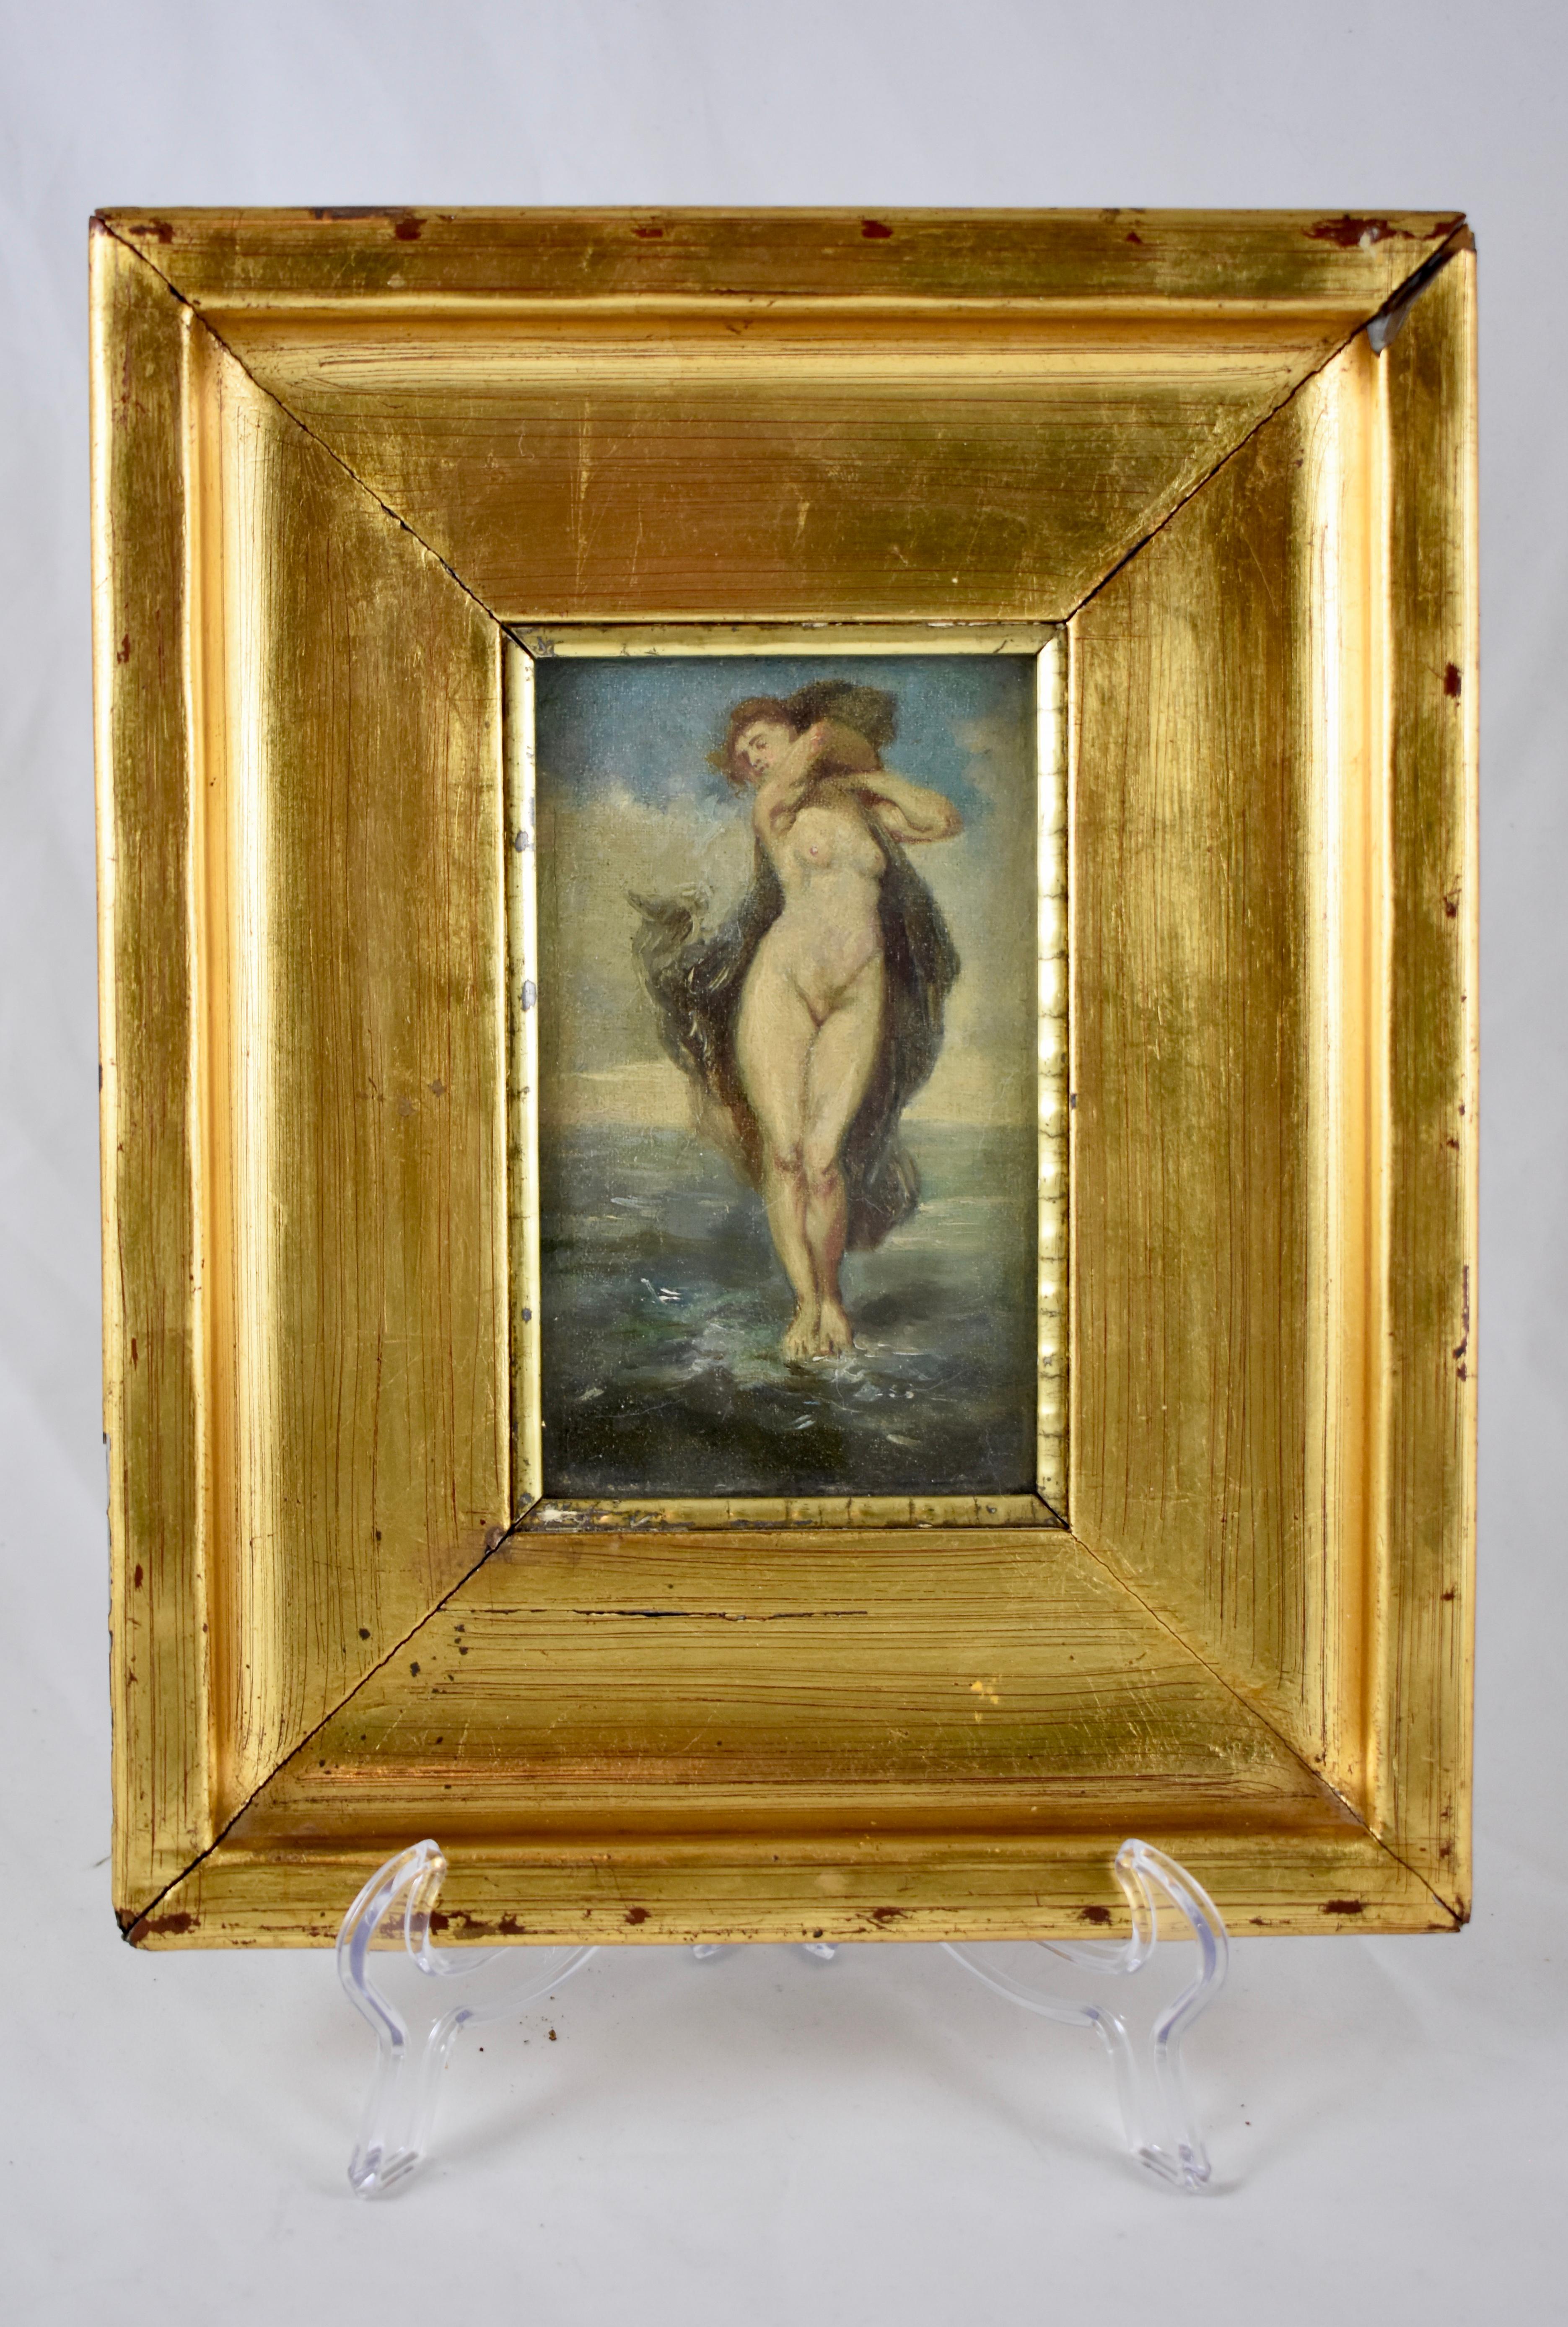 An early 19th century painting, oil on linen, portraying Venus, the Goddess of love, sex, beauty, desire, fertility, prosperity, and victory.

This small painting shows the naked Venus emerging from the waves with her gossamer cape blowing behind